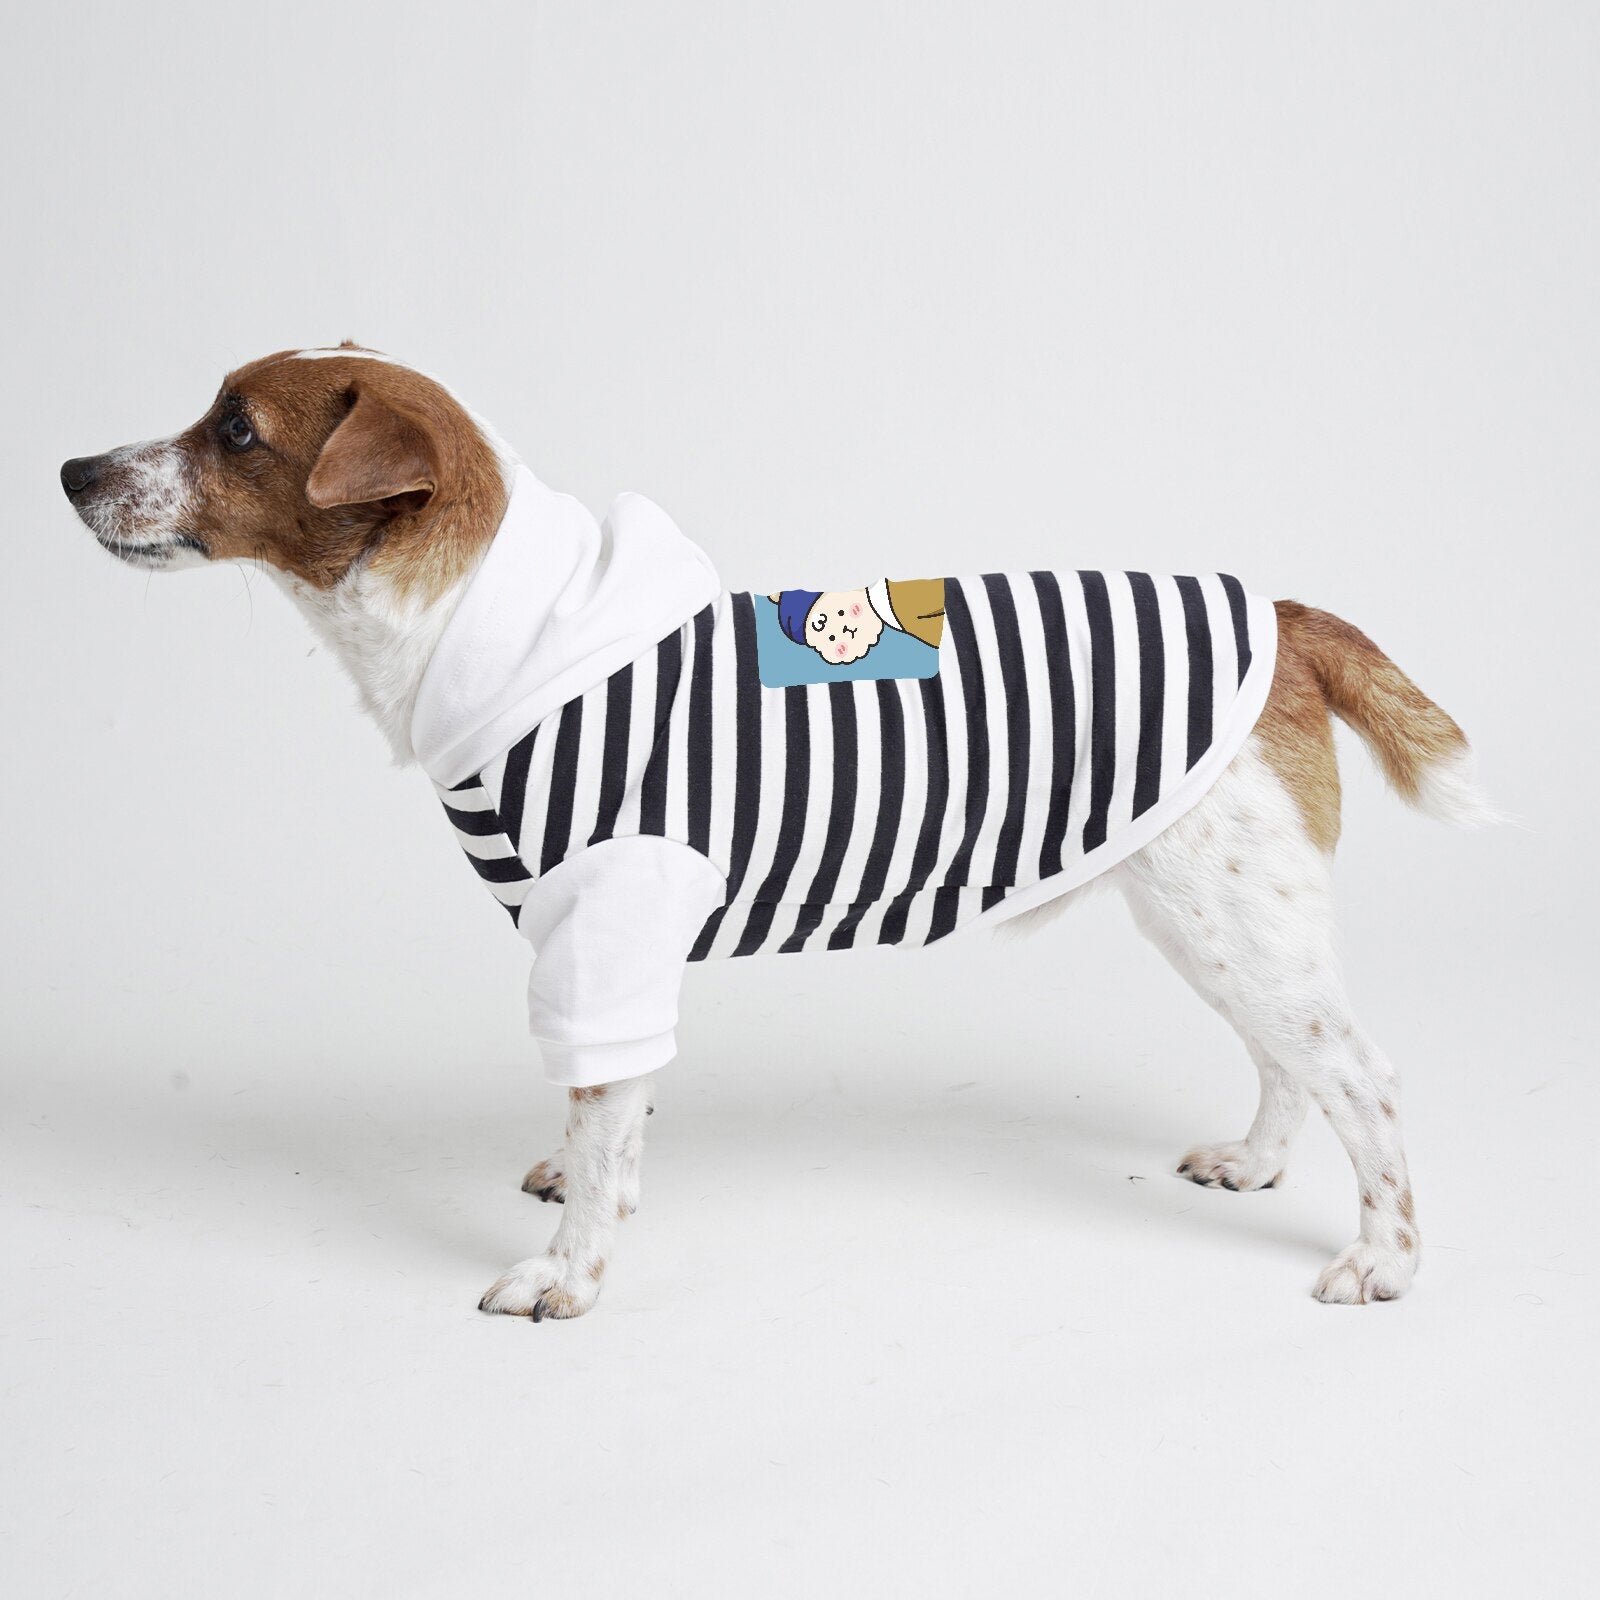 Funny Cute Pet Hoodies Stripe White Red for Dogs Cat in All Sizes and Ages Boys and Girls, Leash Hole and Big Hood Design